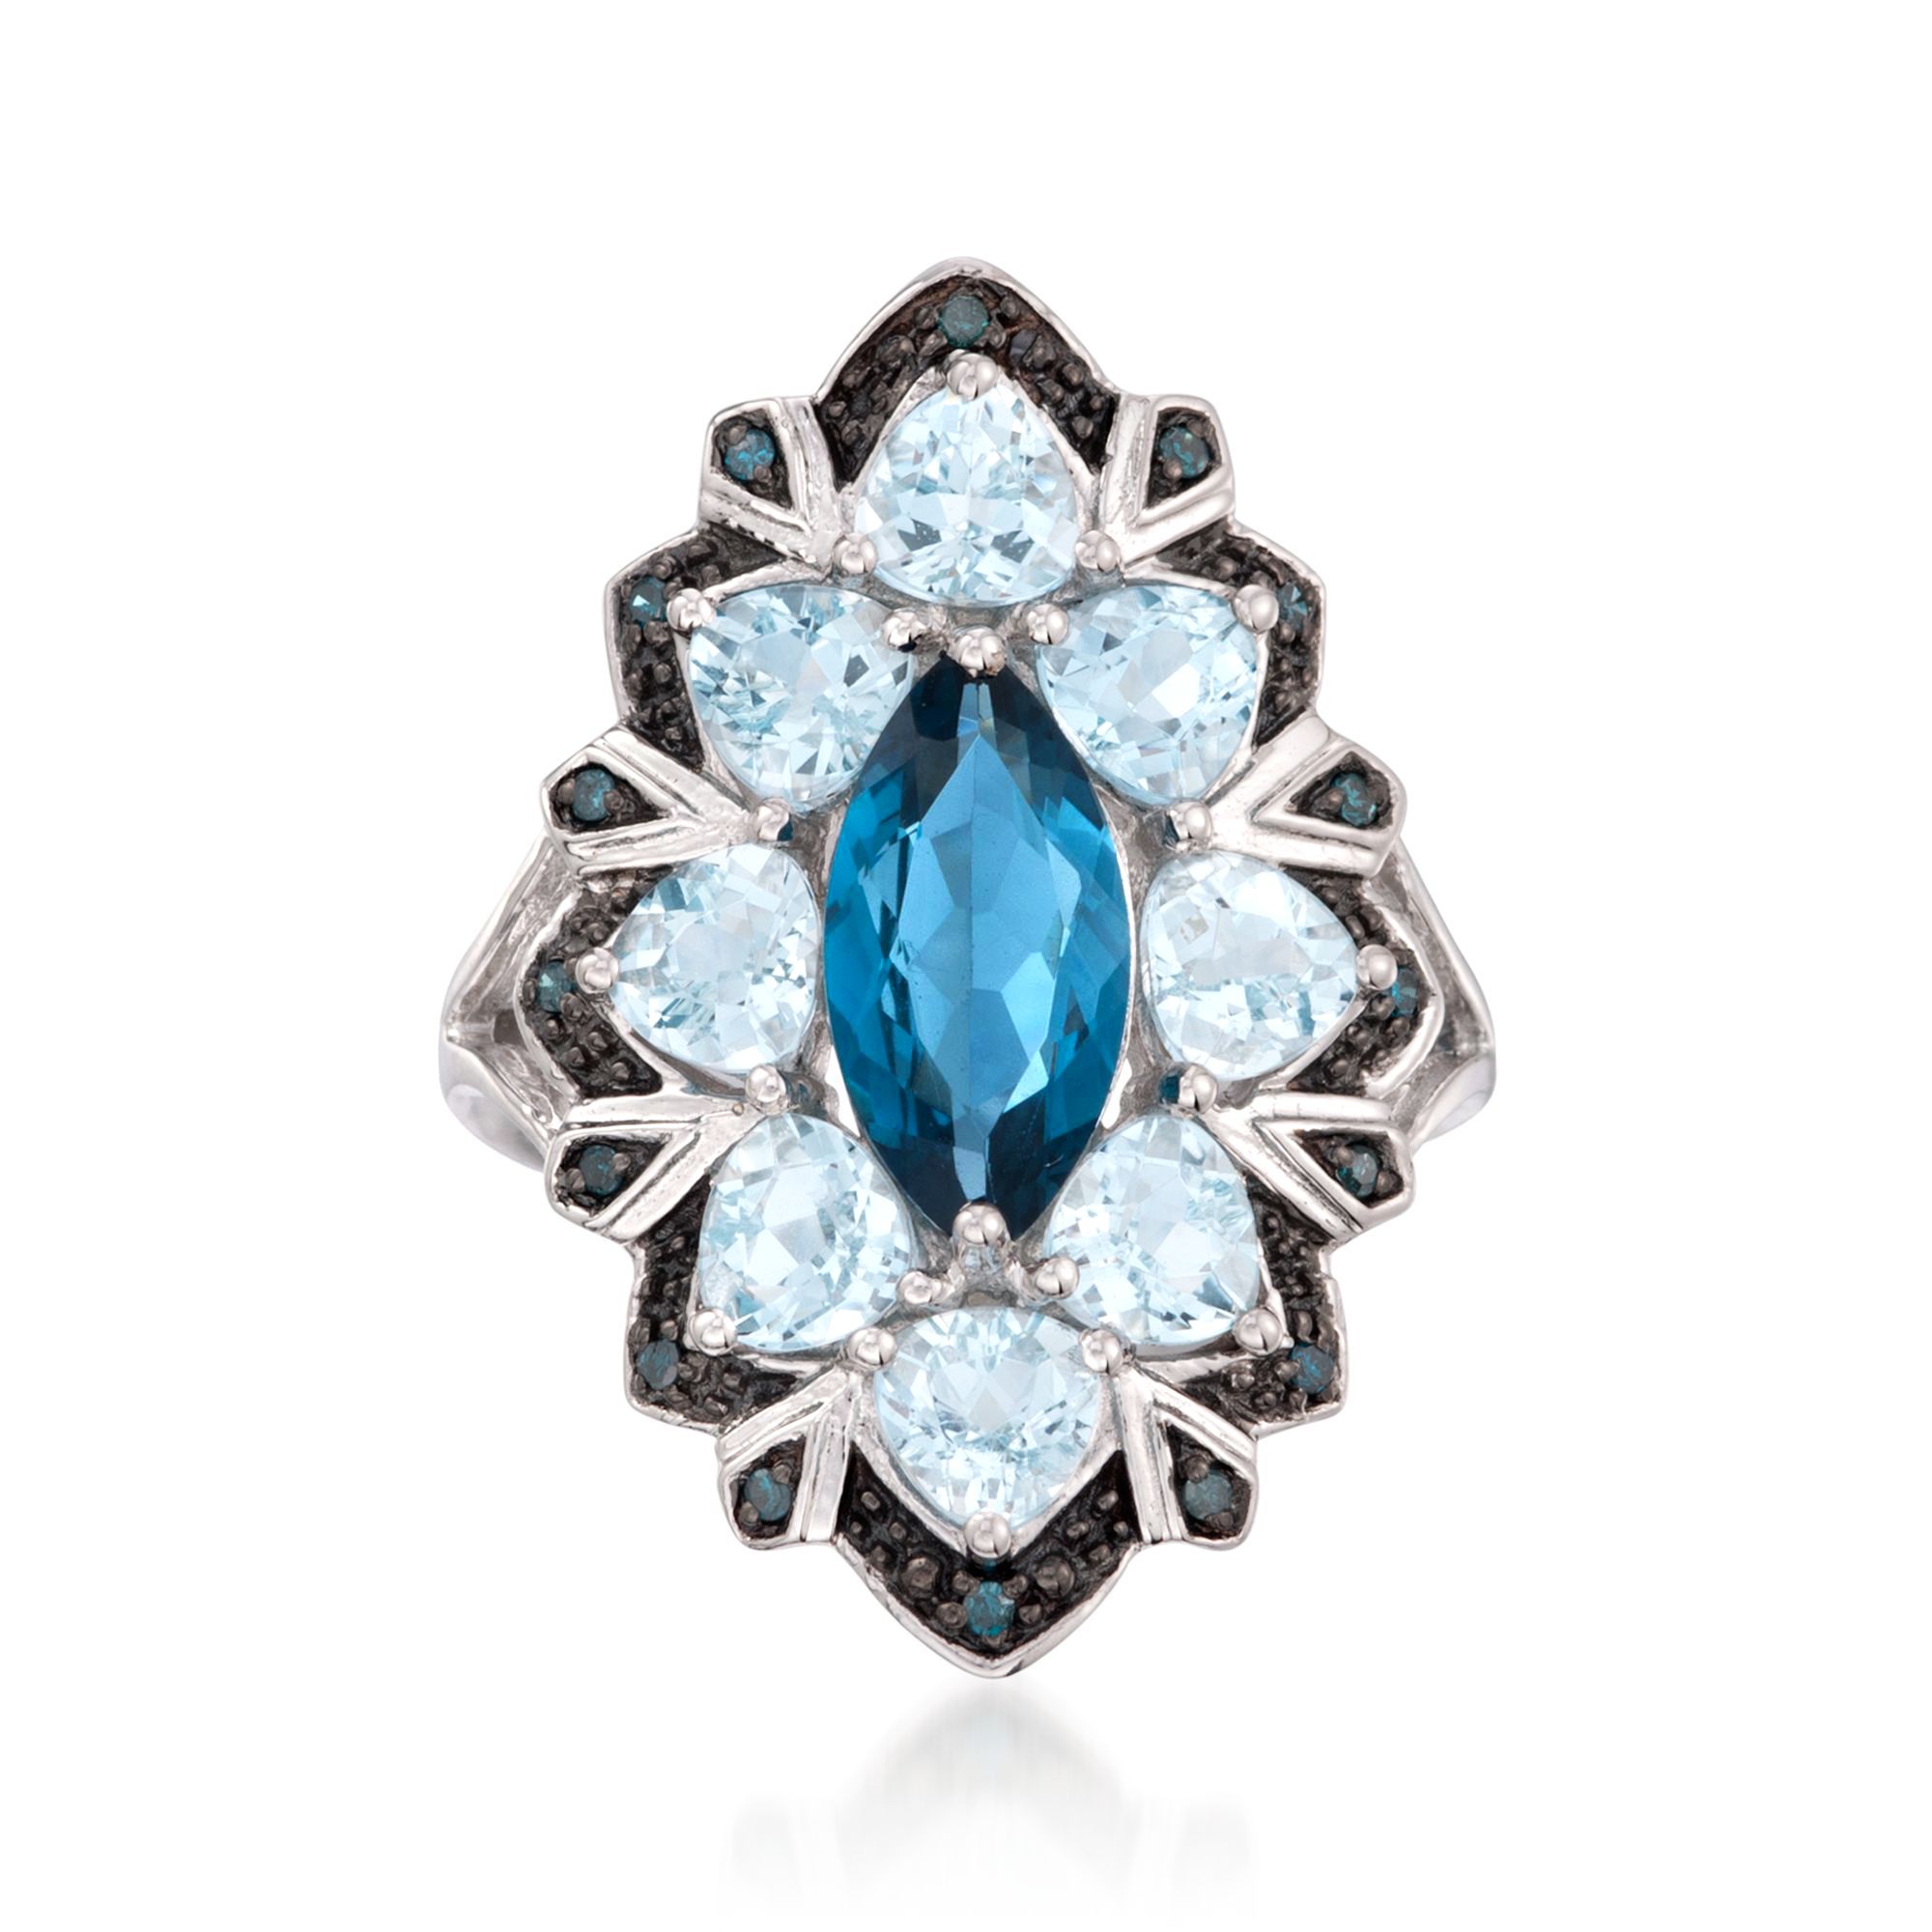 2.20 Carat London Blue Topaz and 2.50 ct. t.w. Aquamarine Ring with Blue  Diamonds in Sterling Silver | Ross-Simons